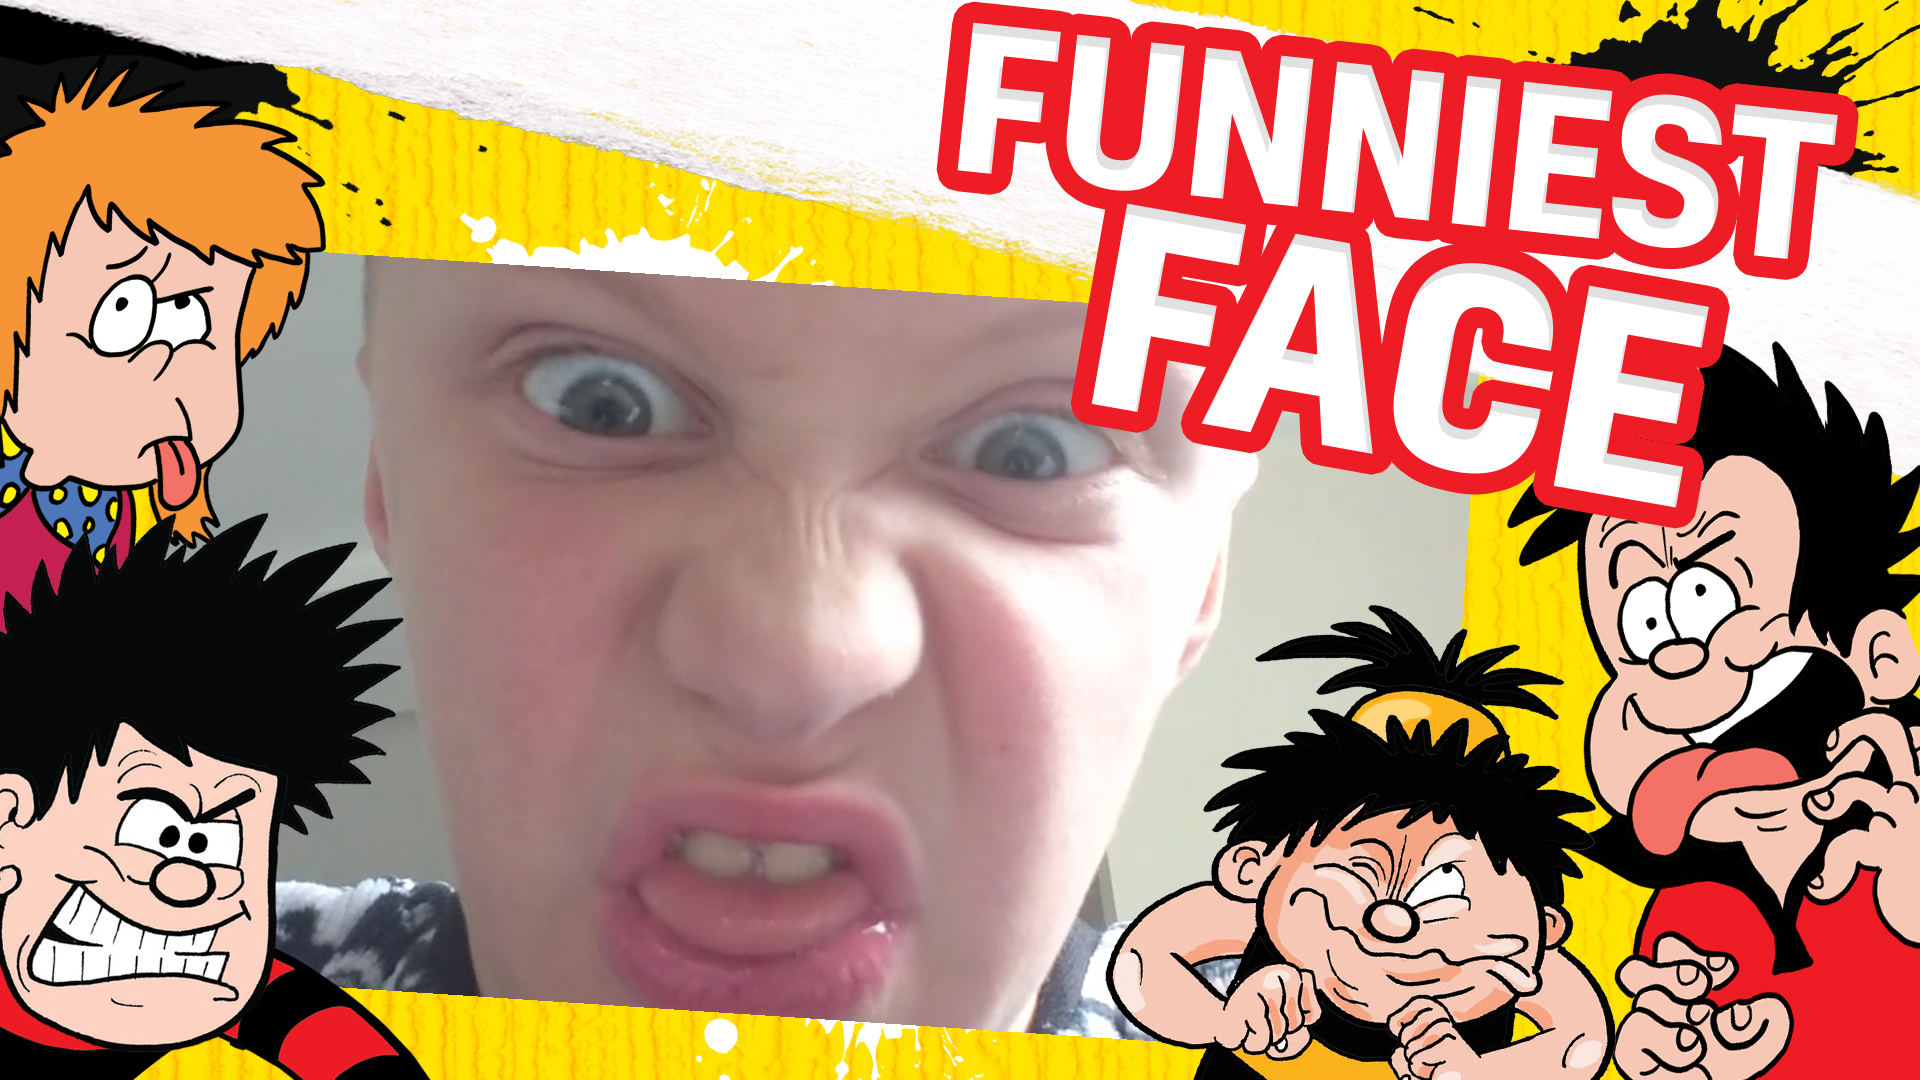 Funniest Family Face! - Get Inspired